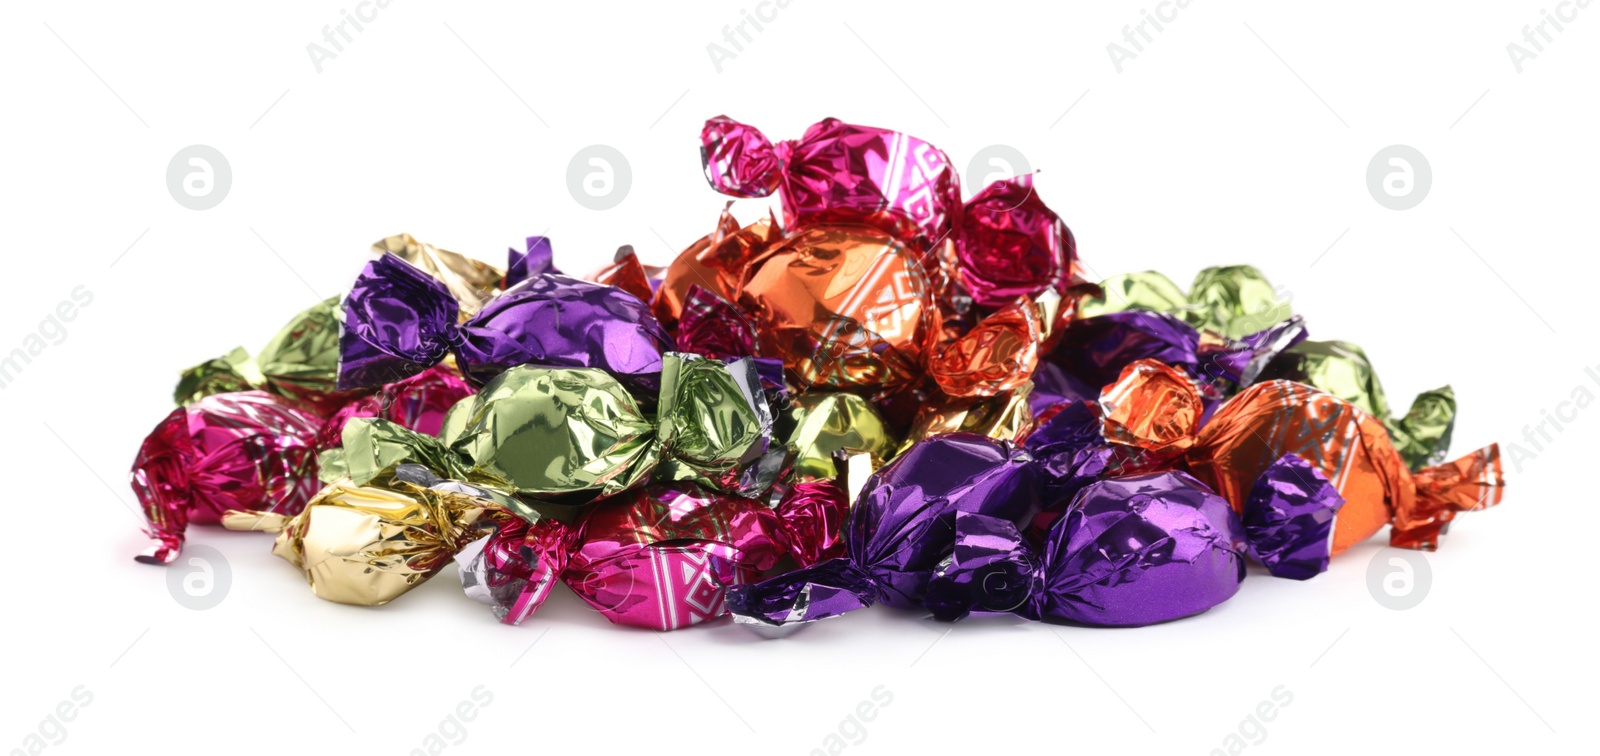 Photo of Candies in colorful wrappers isolated on white